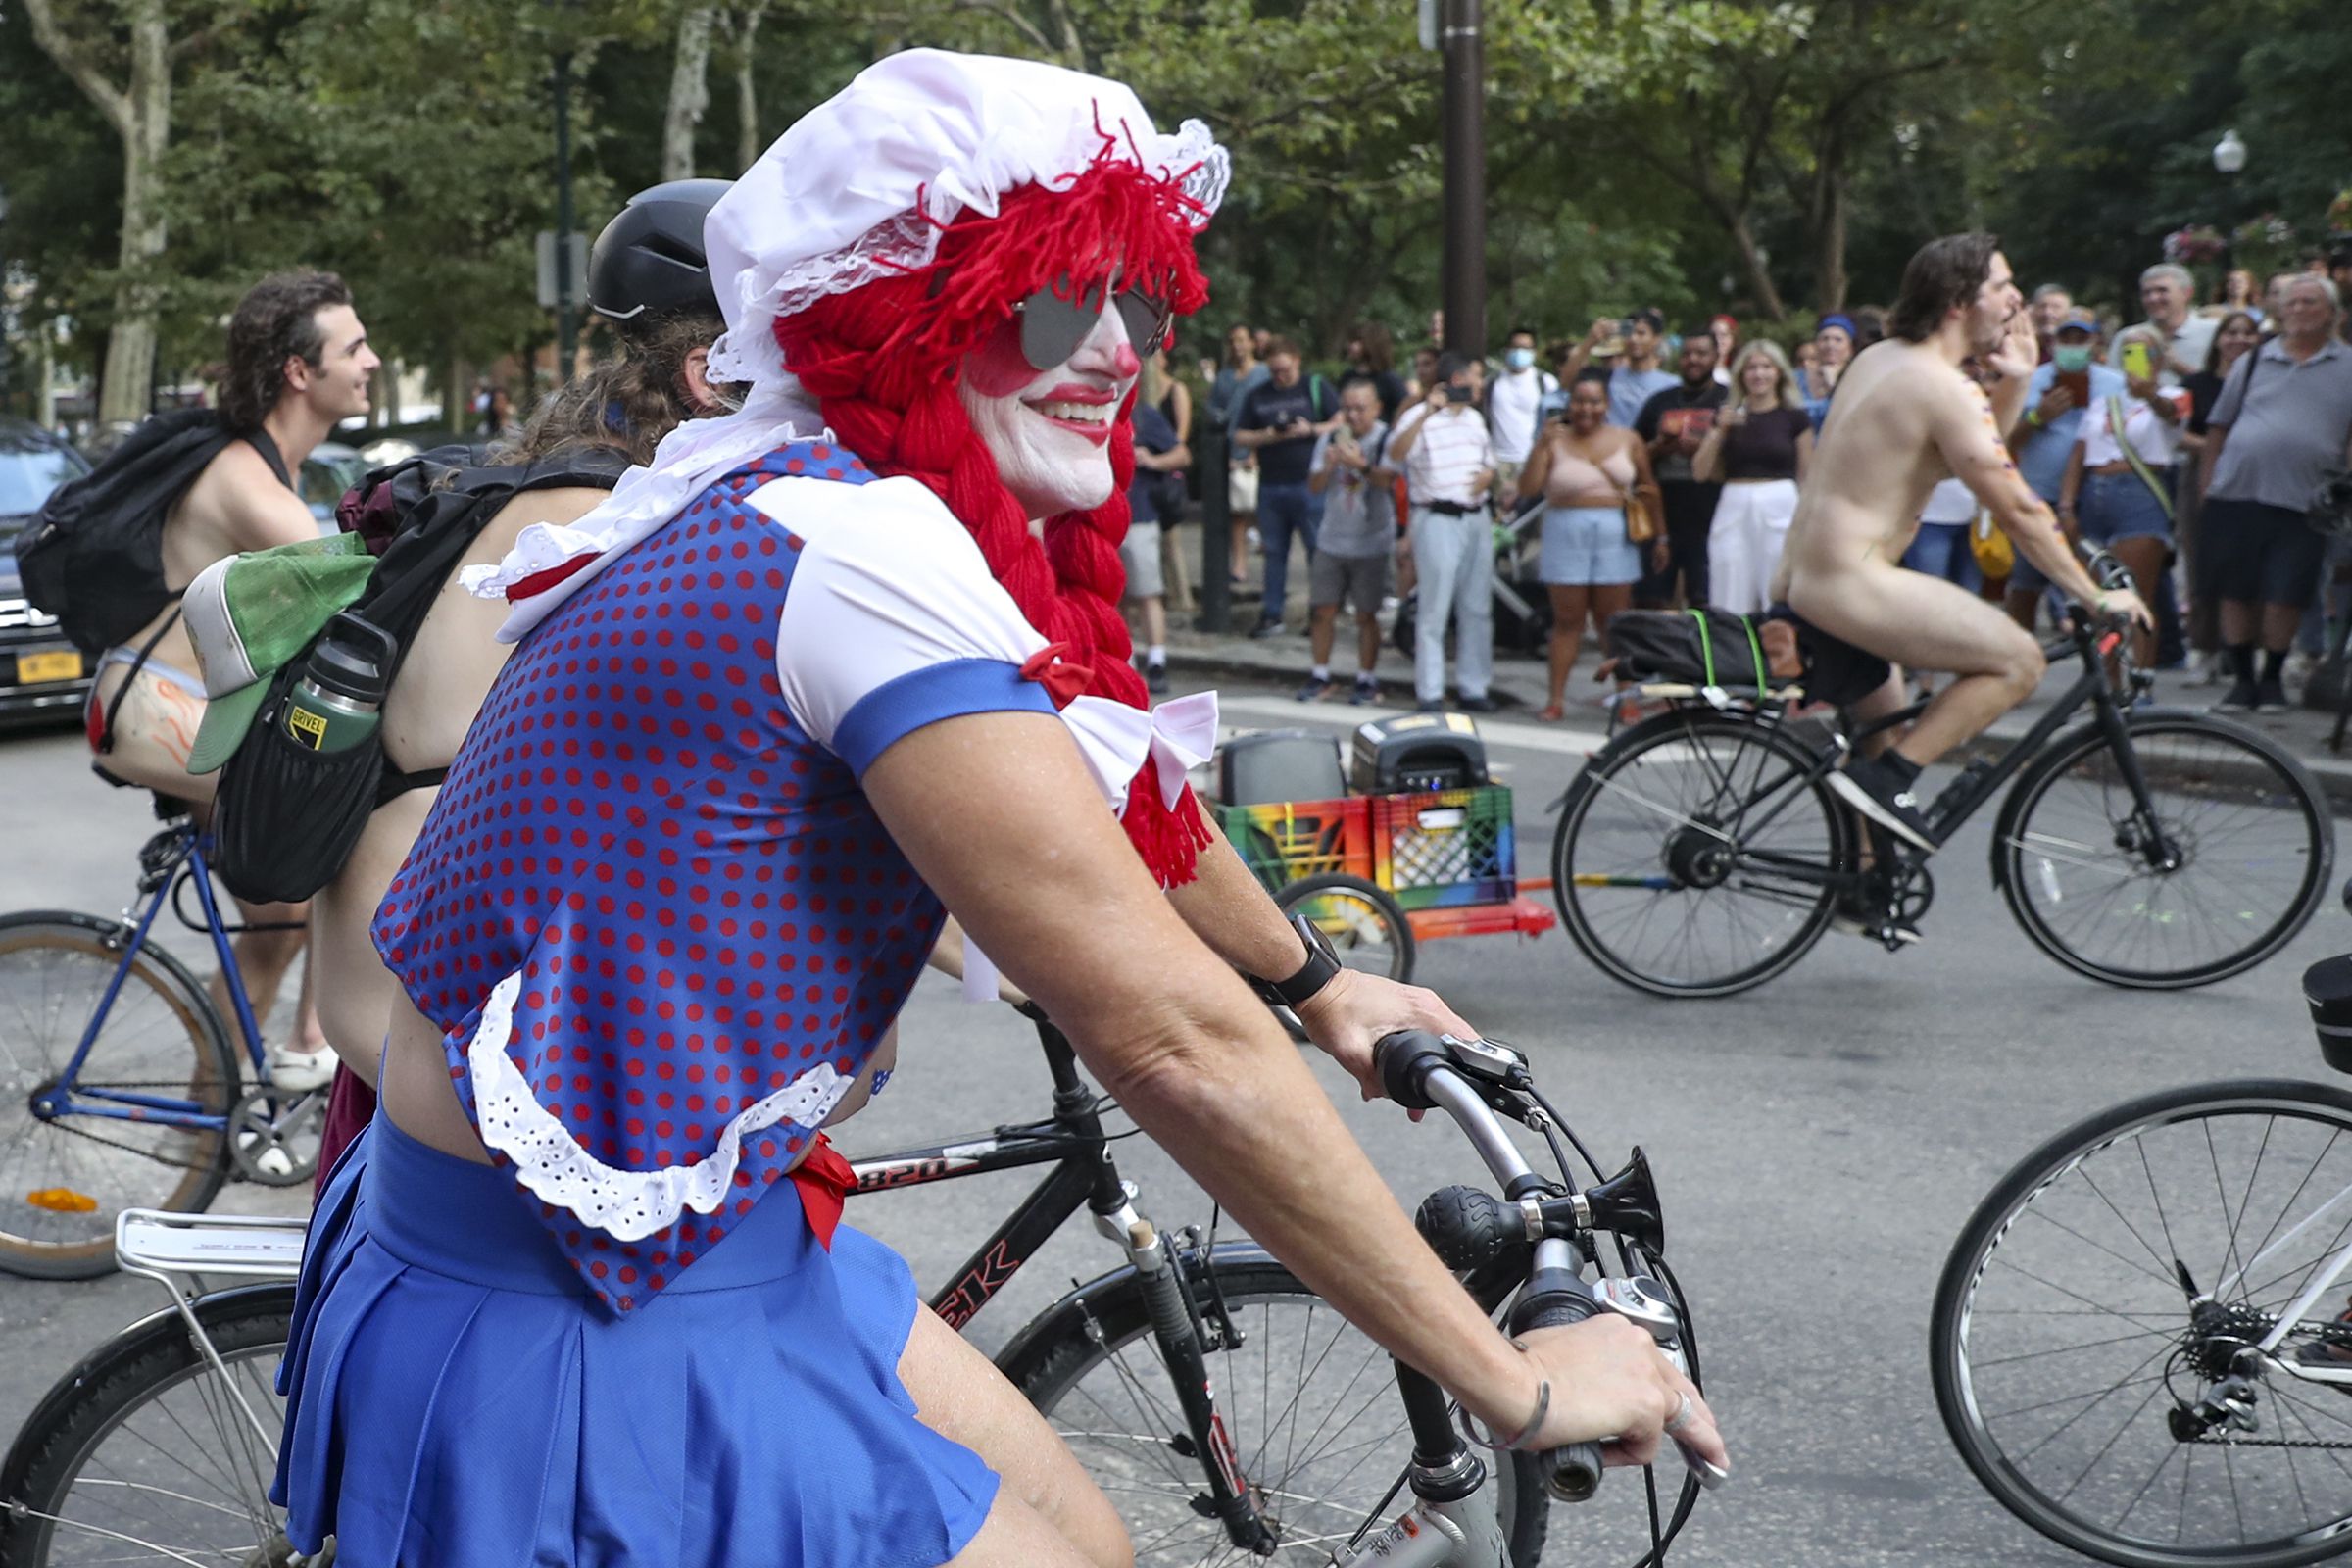 Philly Naked Bike Ride 2022: Route, festivities, afterparty